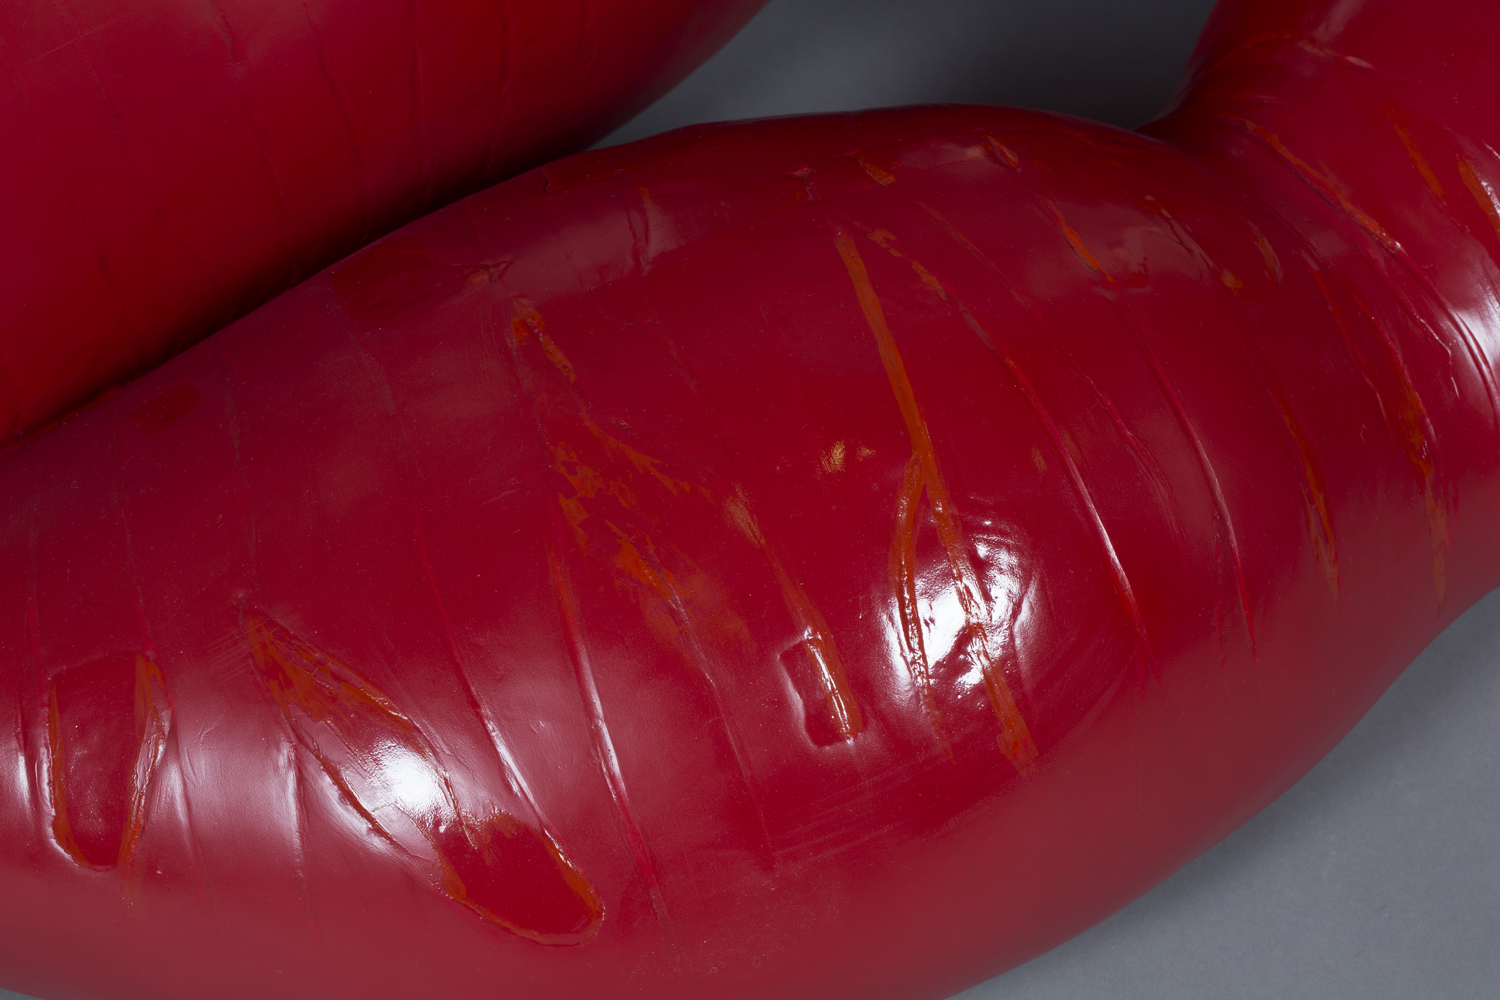 A Louis Durot red polyurethane and foam 'L'échauffeuse' sofa sculpture, moulded in the form of a - Image 2 of 3